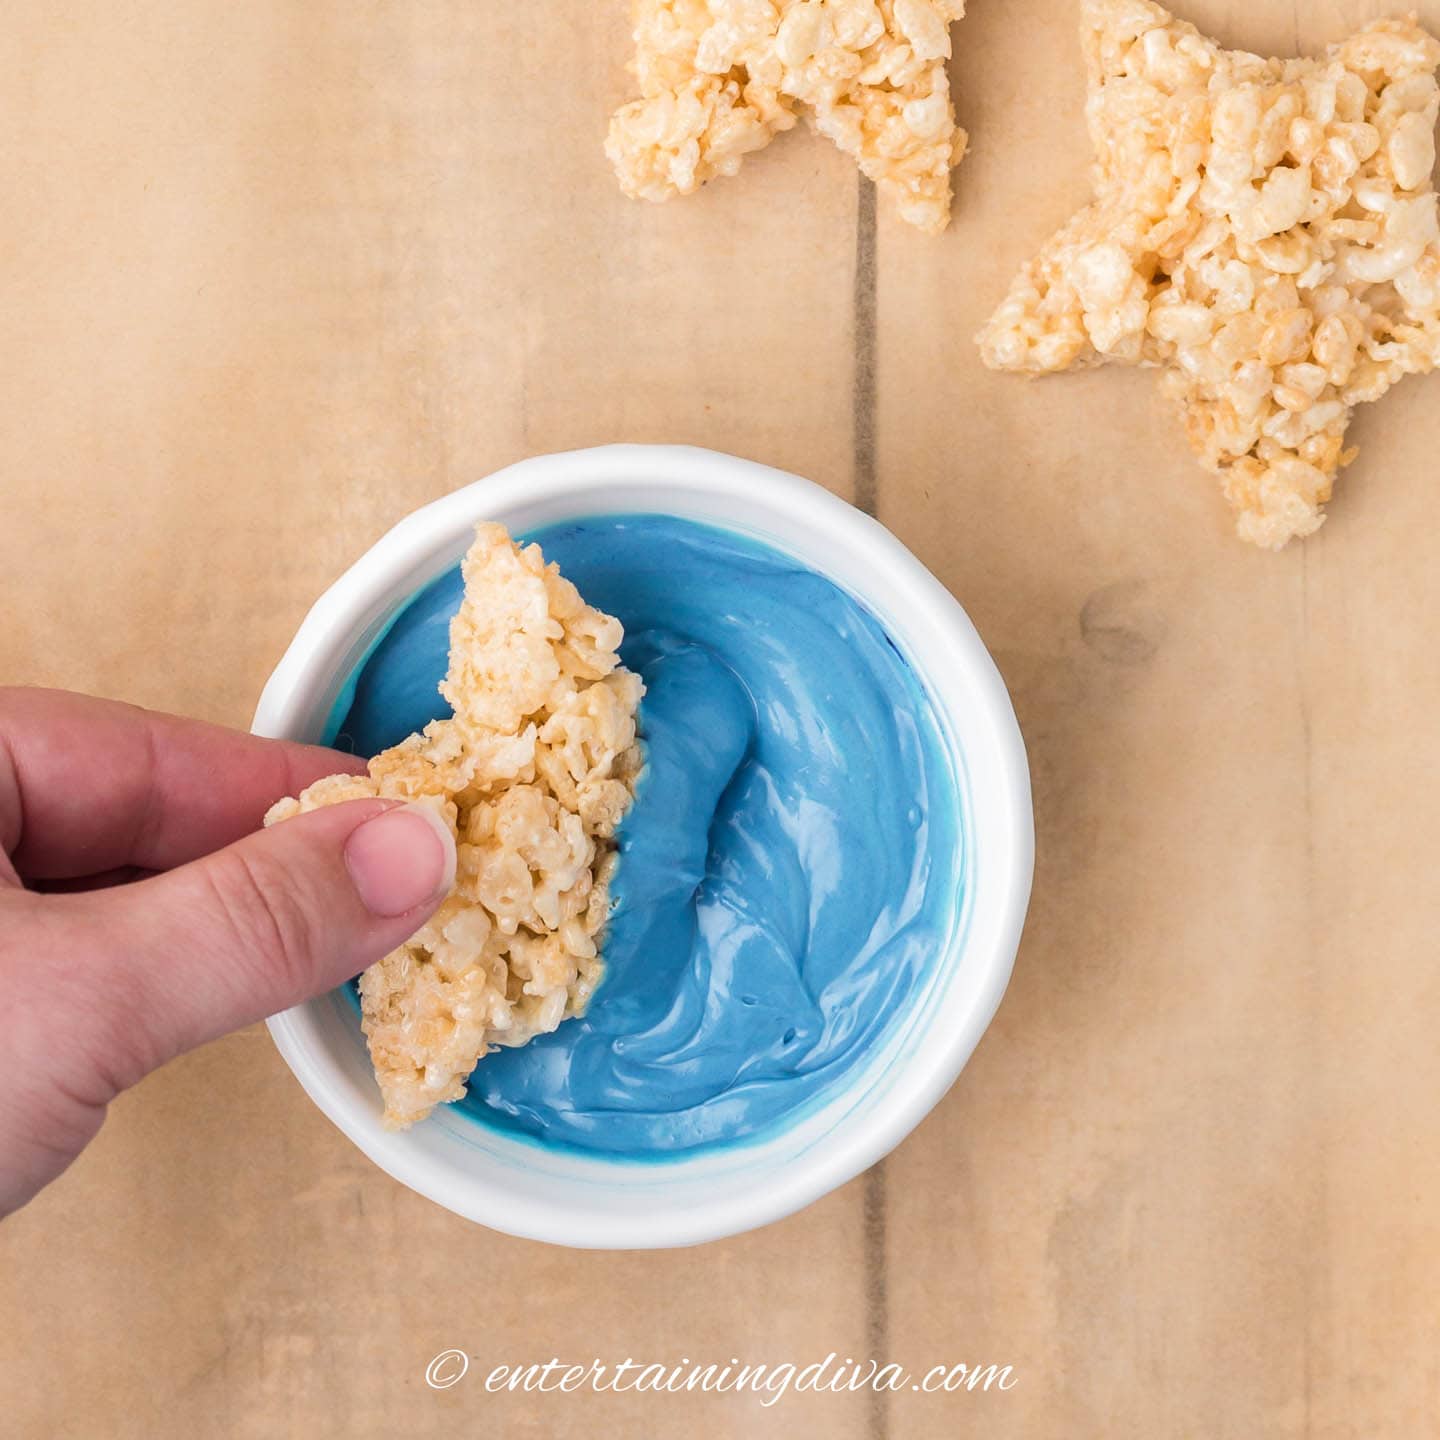 Star-shaped rice krispie treat being dipped in melted blue candy